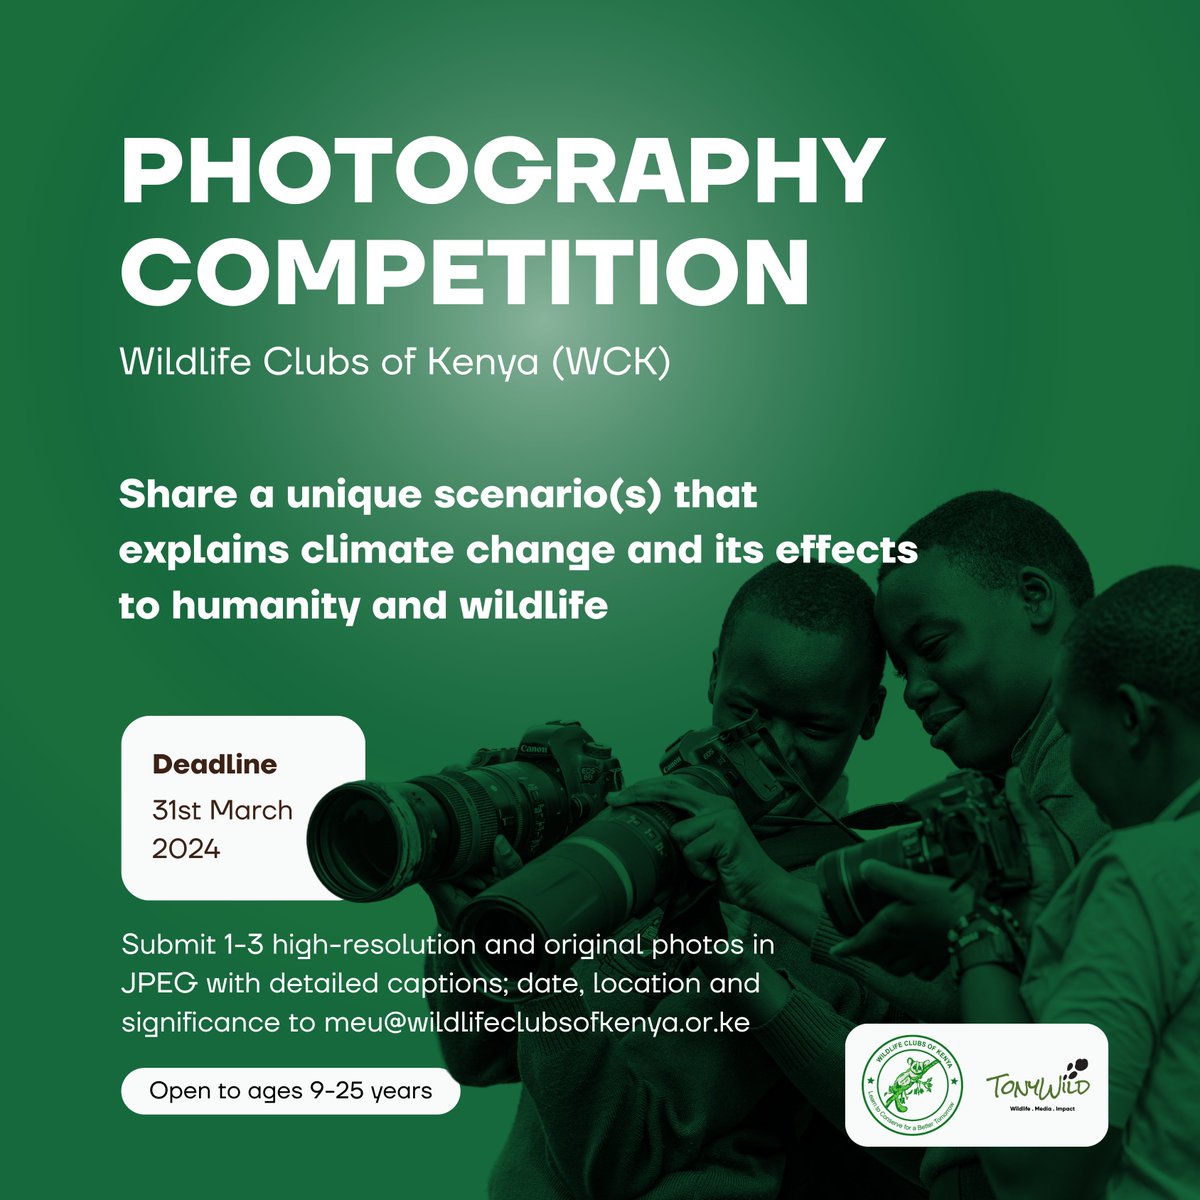 📷We are thrilled to announce our partnership with the @wildlife_clubs for their annual essay, art, and photography competition! 

This year, we're particularly excited to support the #PhotoCompetition!

Submit your entry to meu@wildlifeclubsofkenya.or.ke by March 31st, 2024.